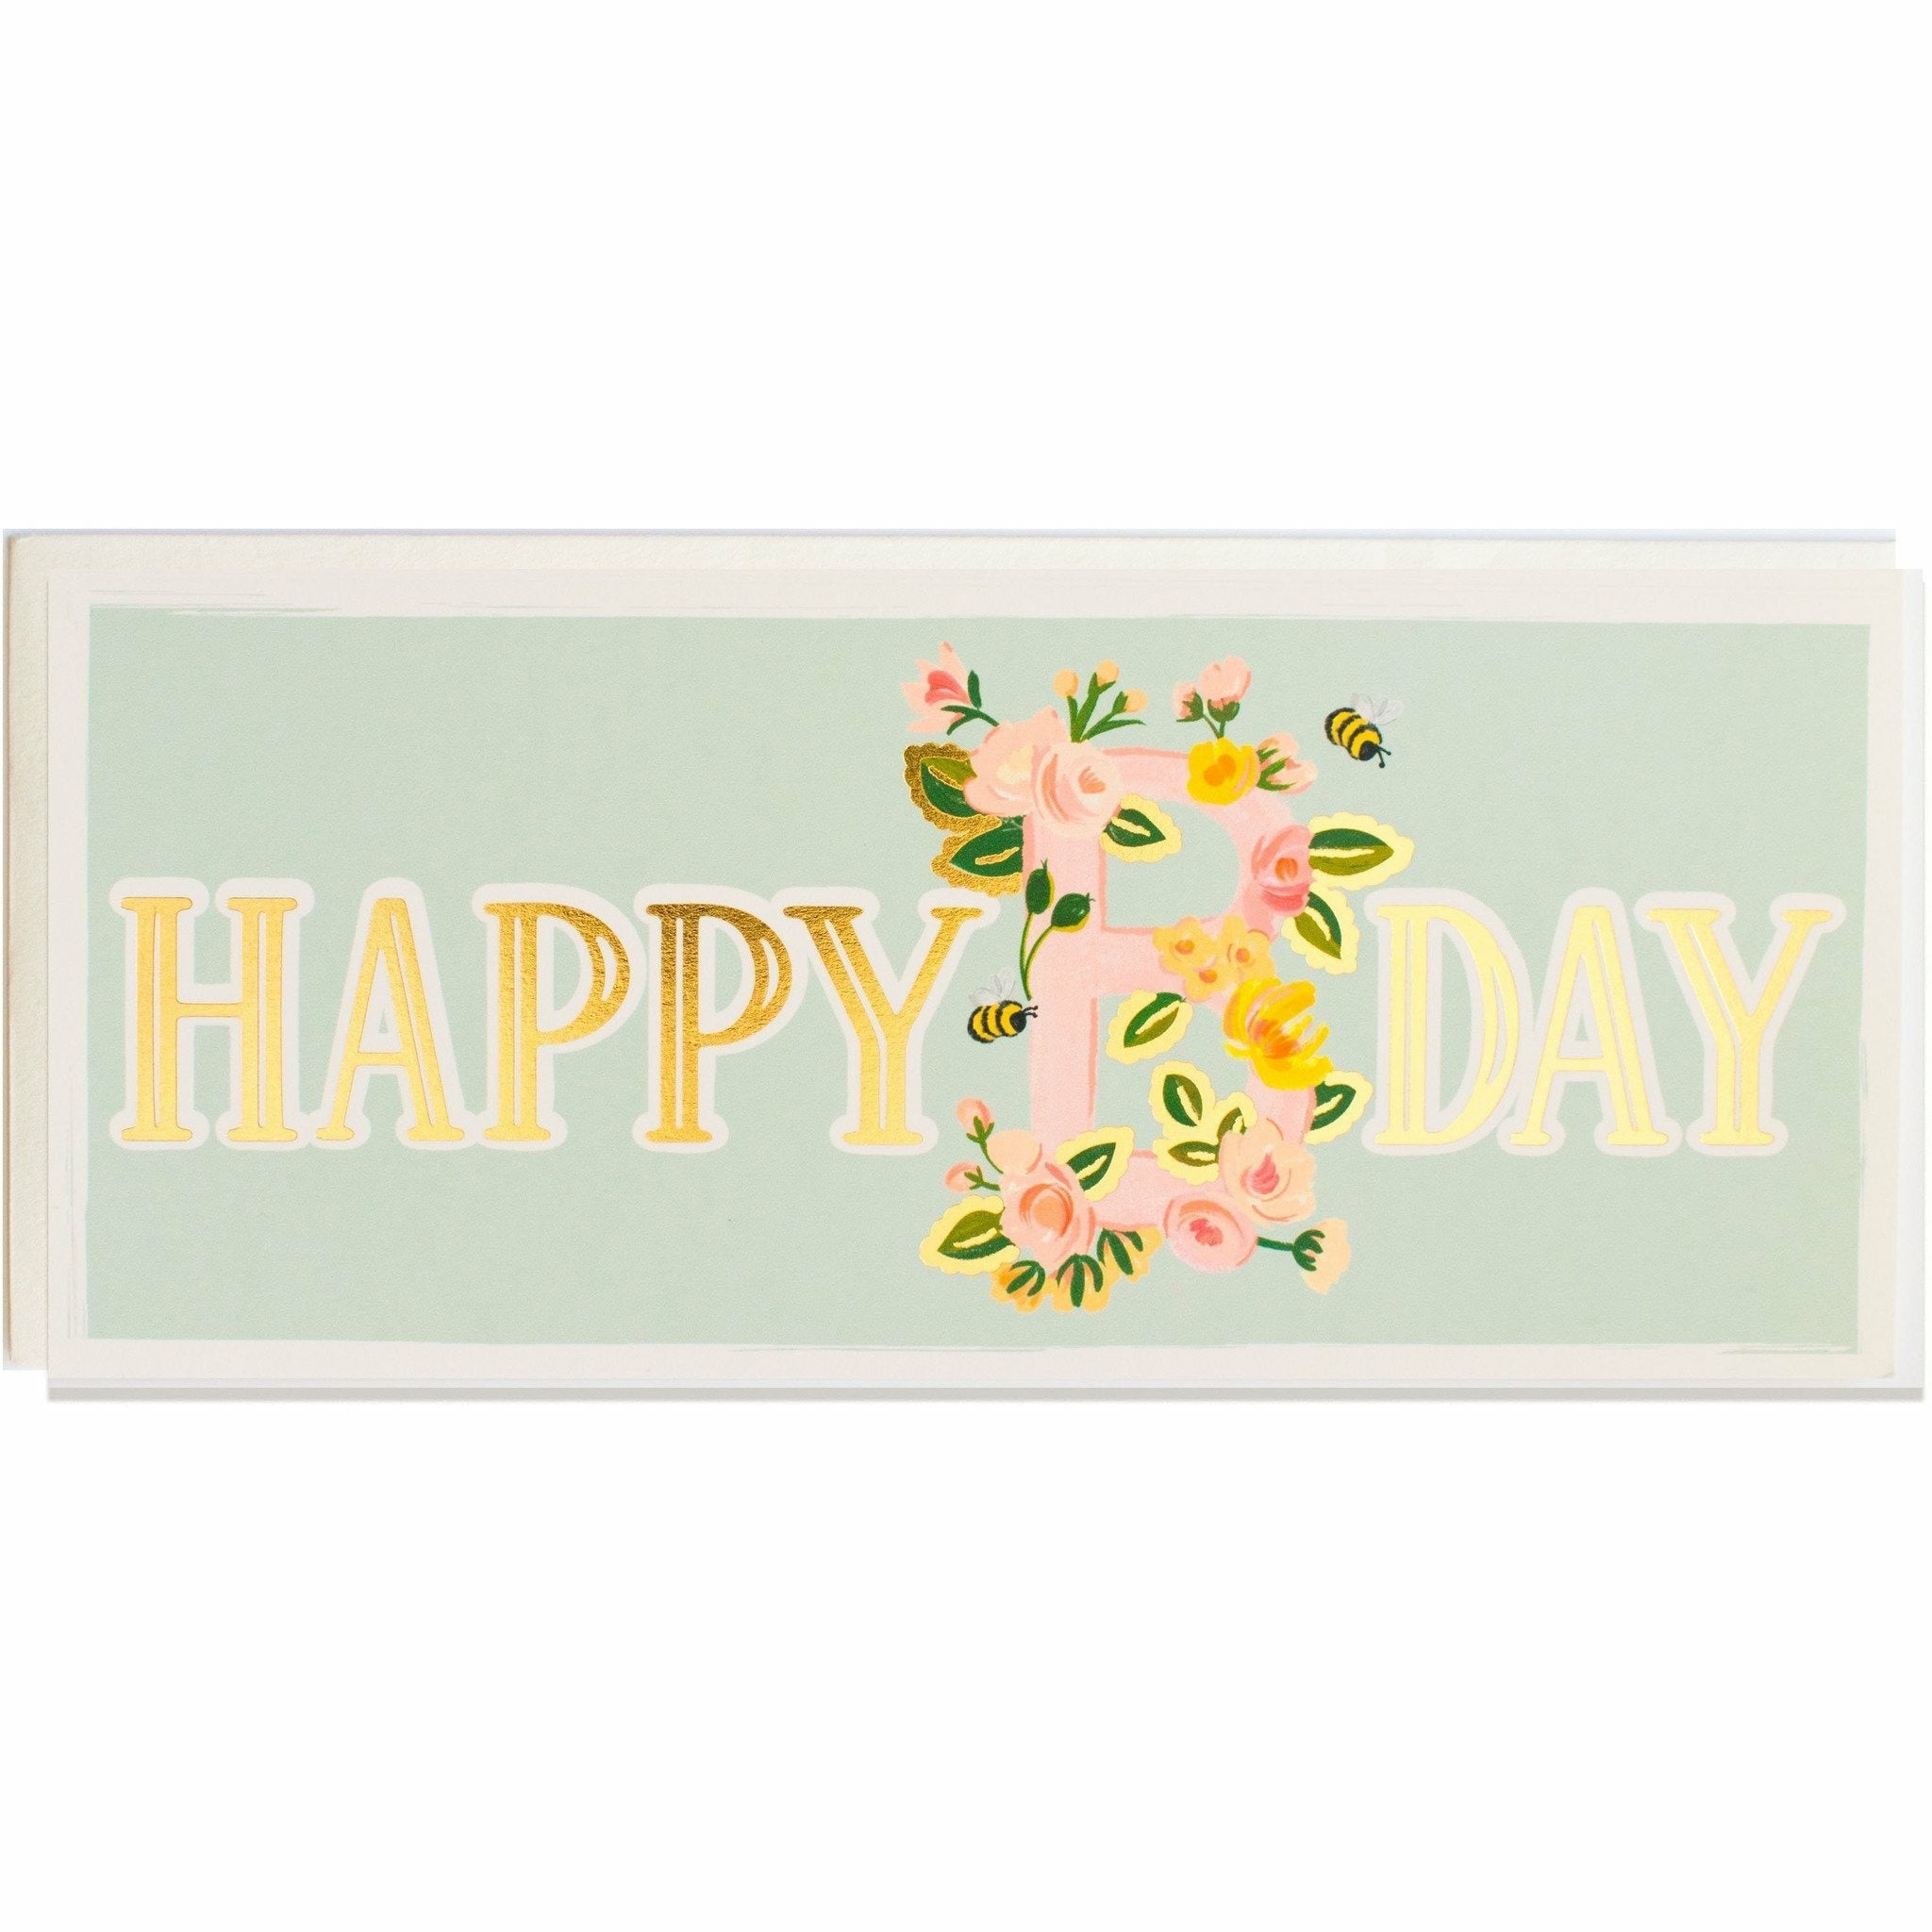 Happy Birthday Floral and Gold Foil Long Birthday Card w/ Envelope - The First Snow